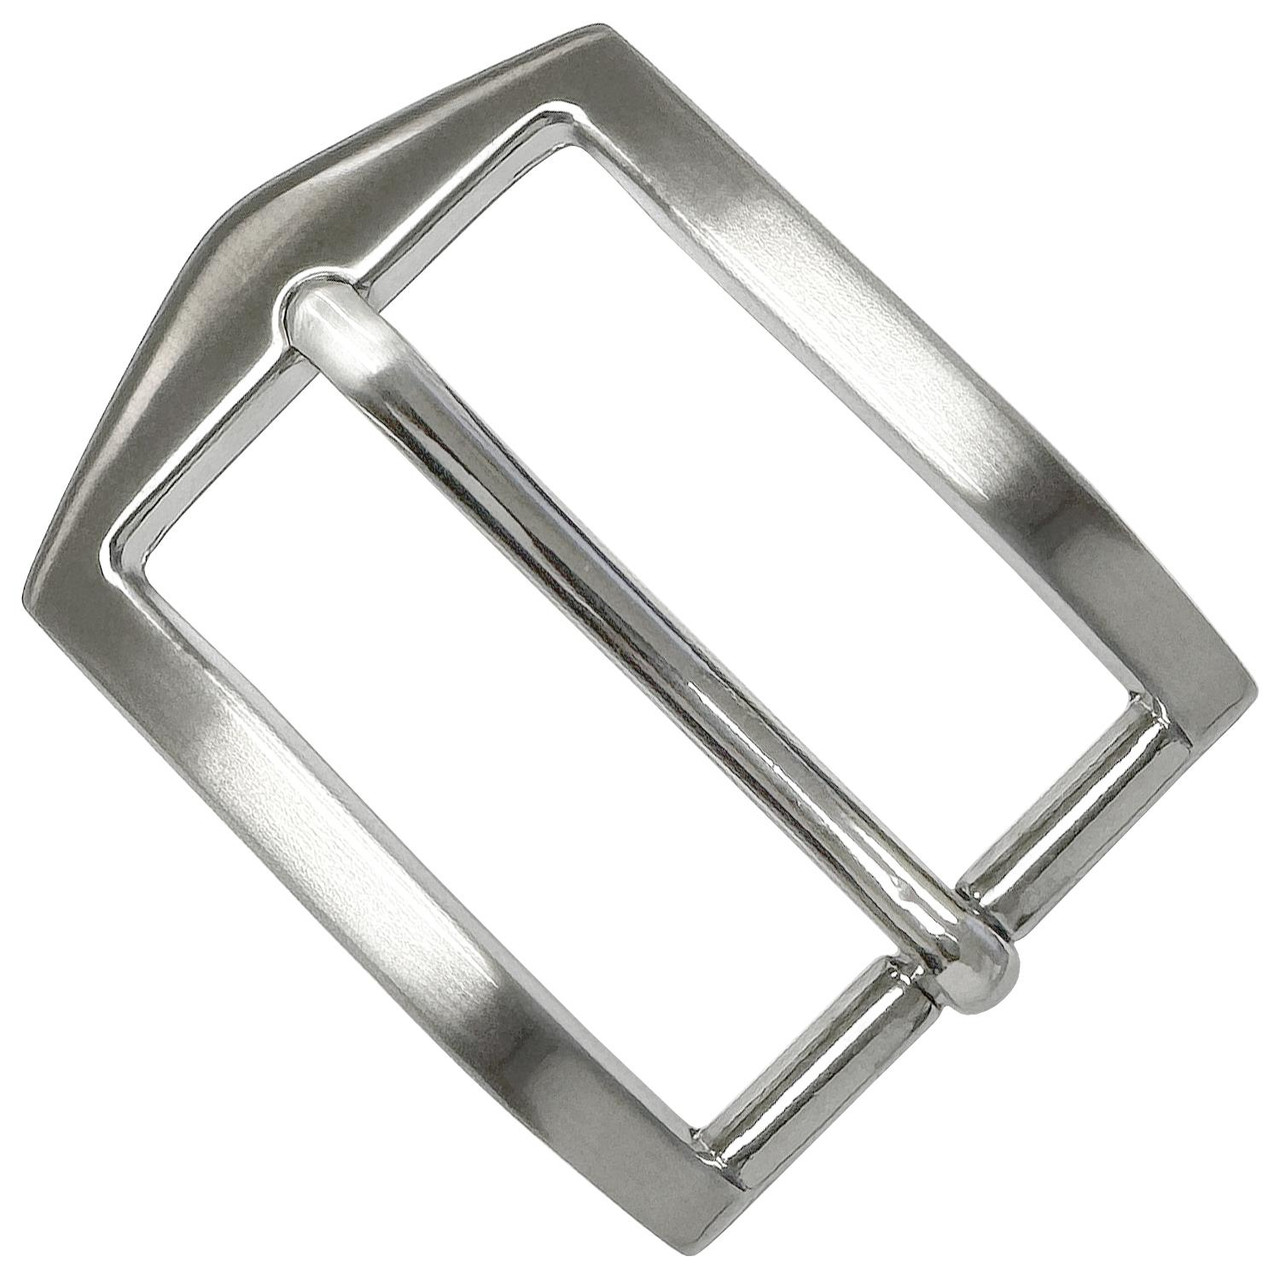 BS3327-NB Replacement Buckle Classic Dress Belt Buckle fits 1-1/8